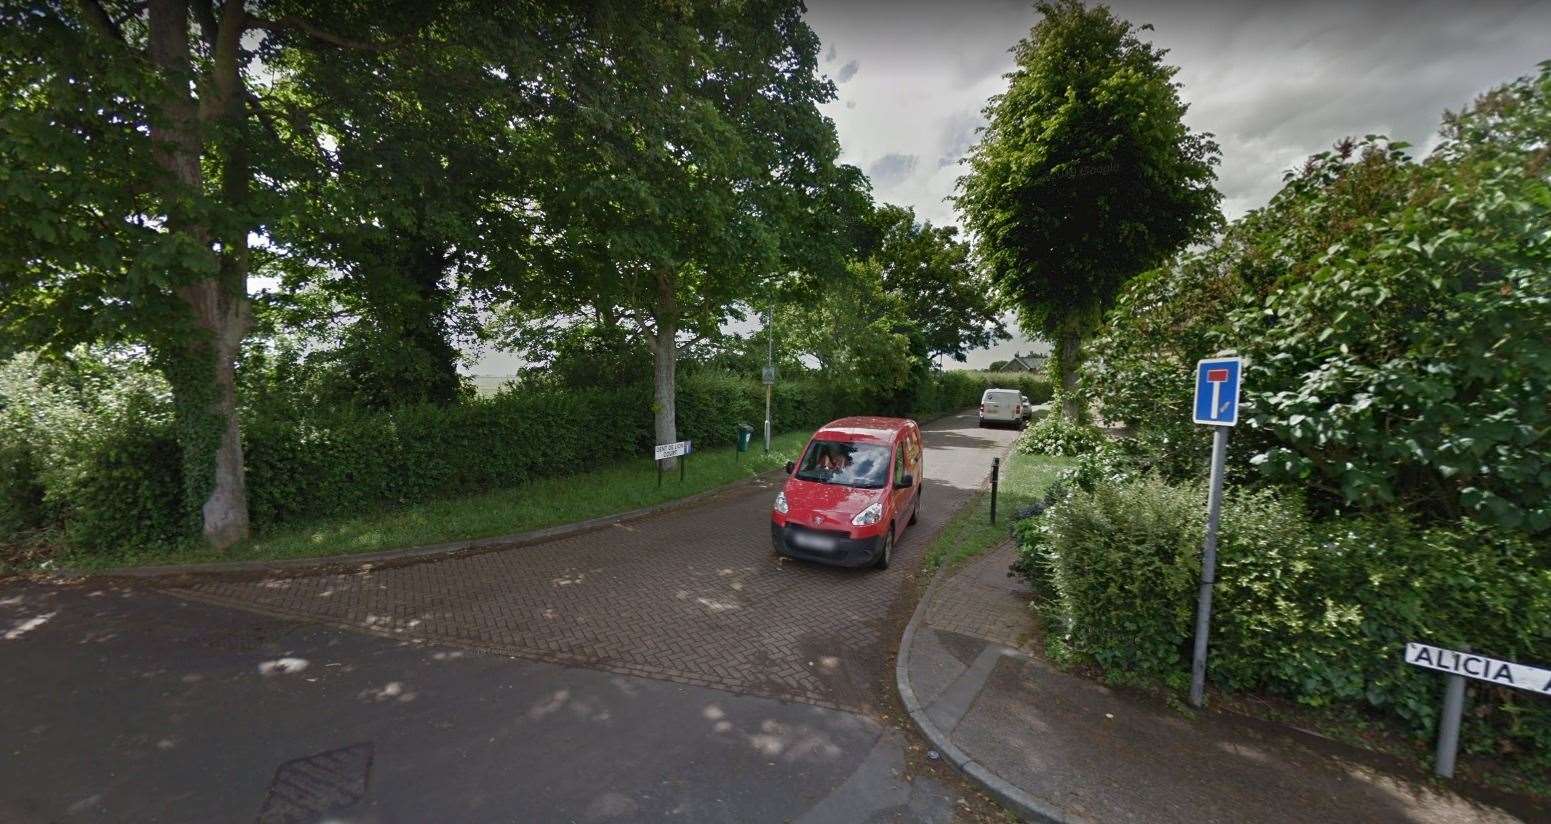 The burglary took place in Dent de Lion Court, Margate. Picture: Google